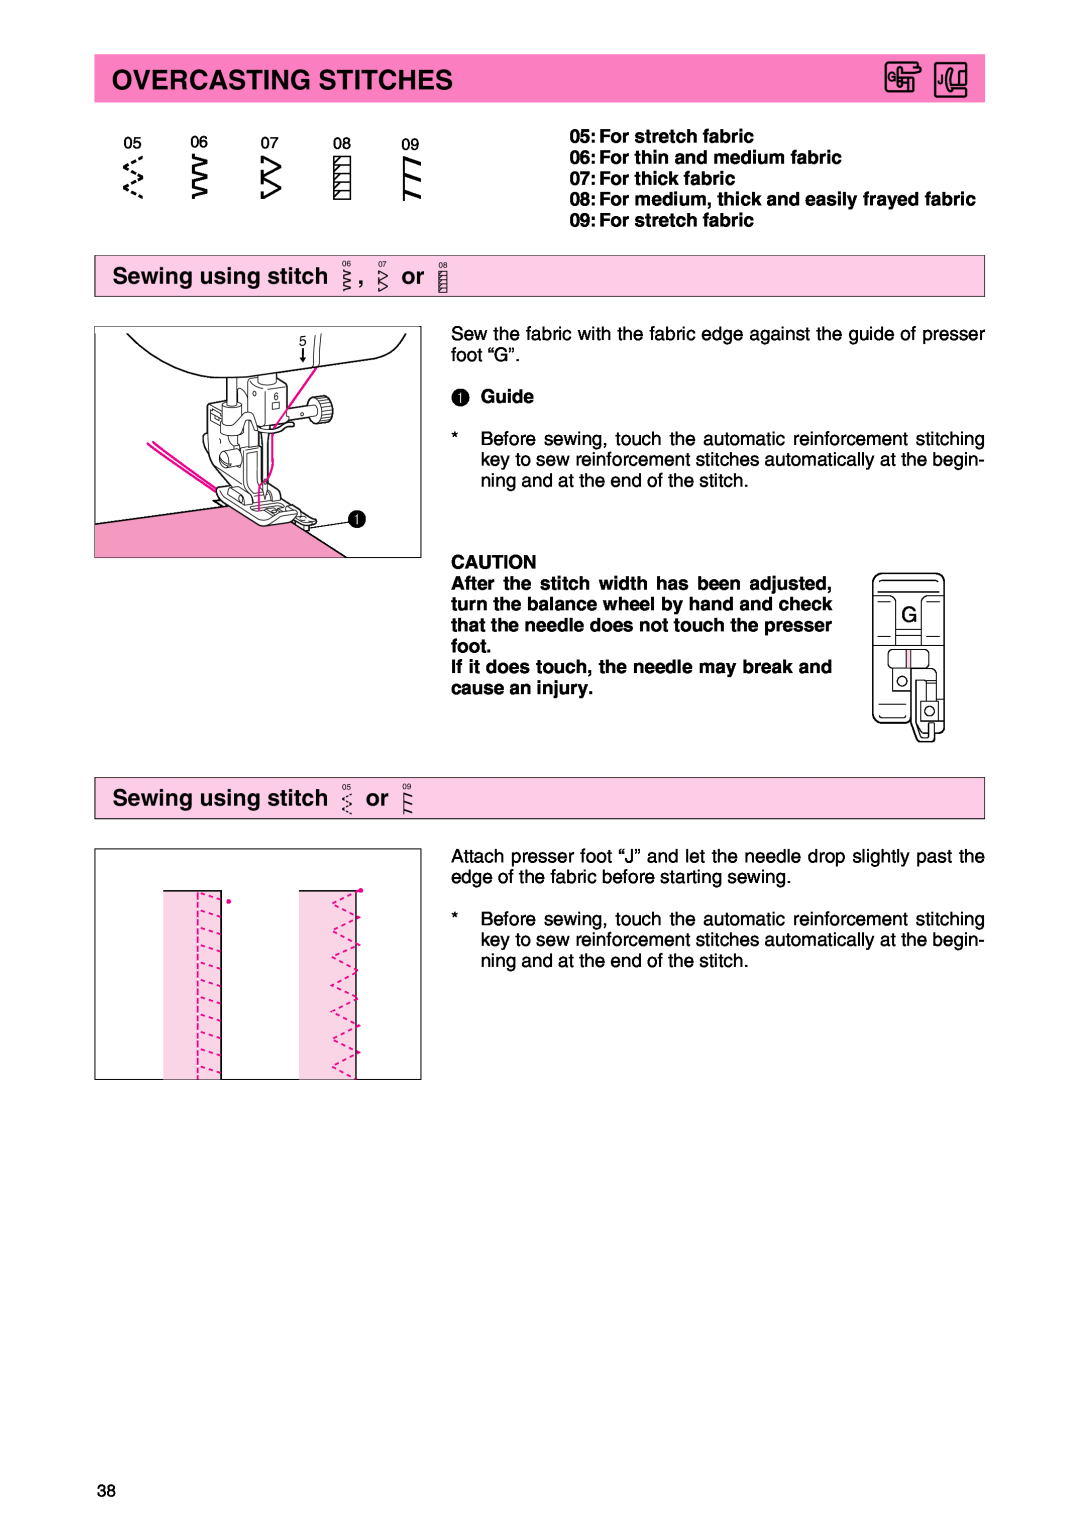 Brother PC 3000 operation manual Overcasting Stitches, Sewing using stitch 06 , 07 or, Sewing using stitch 05 or, Guide 